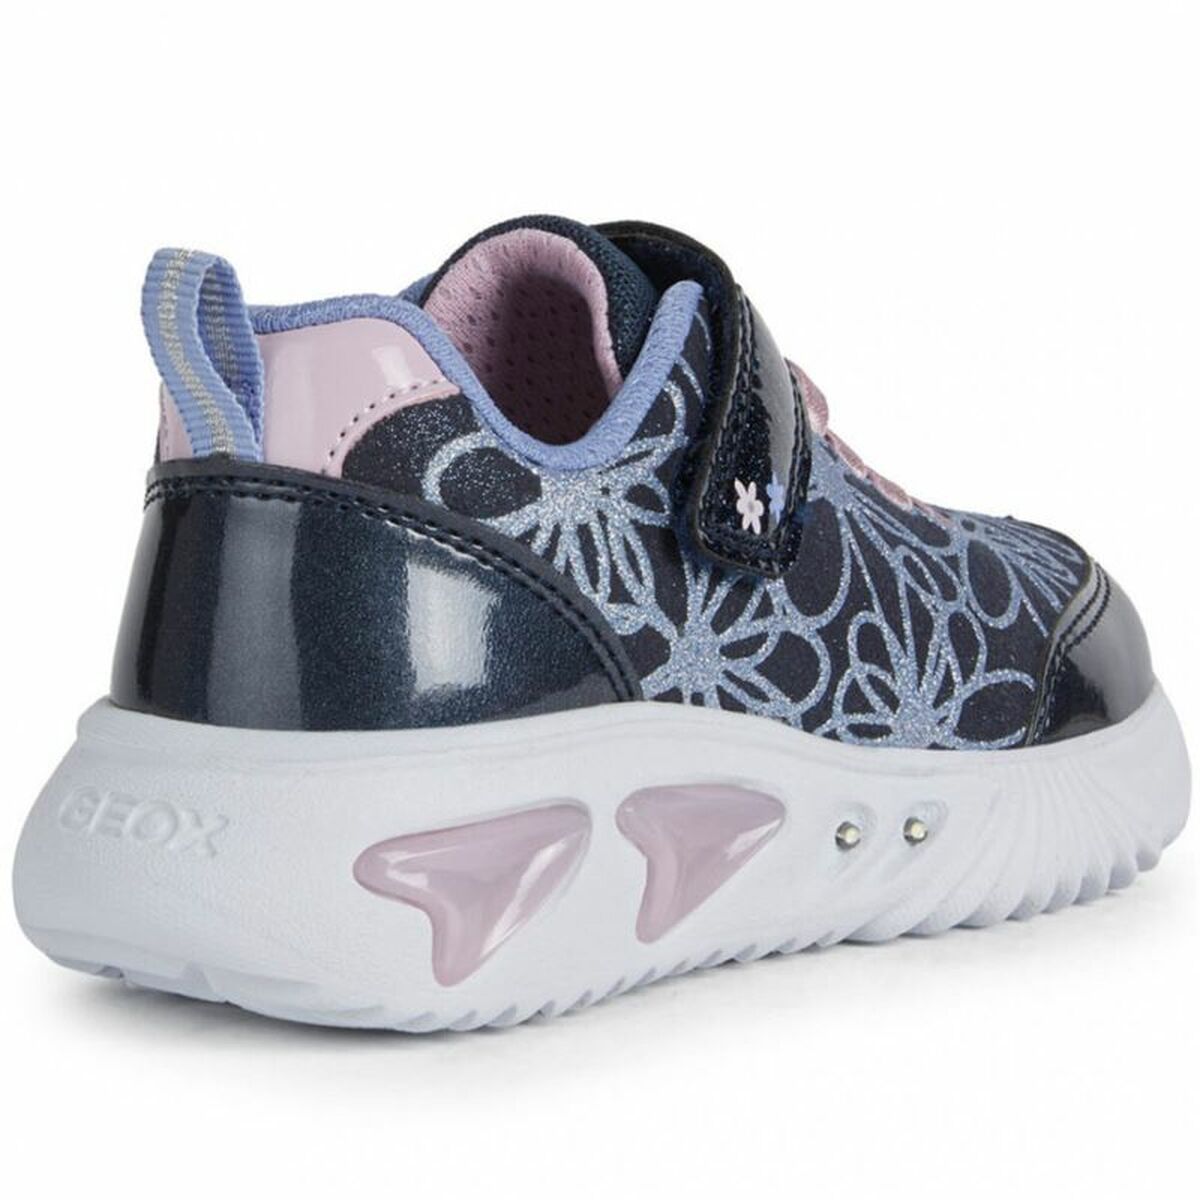 Chaussures casual enfant Geox Assiter Blue marine